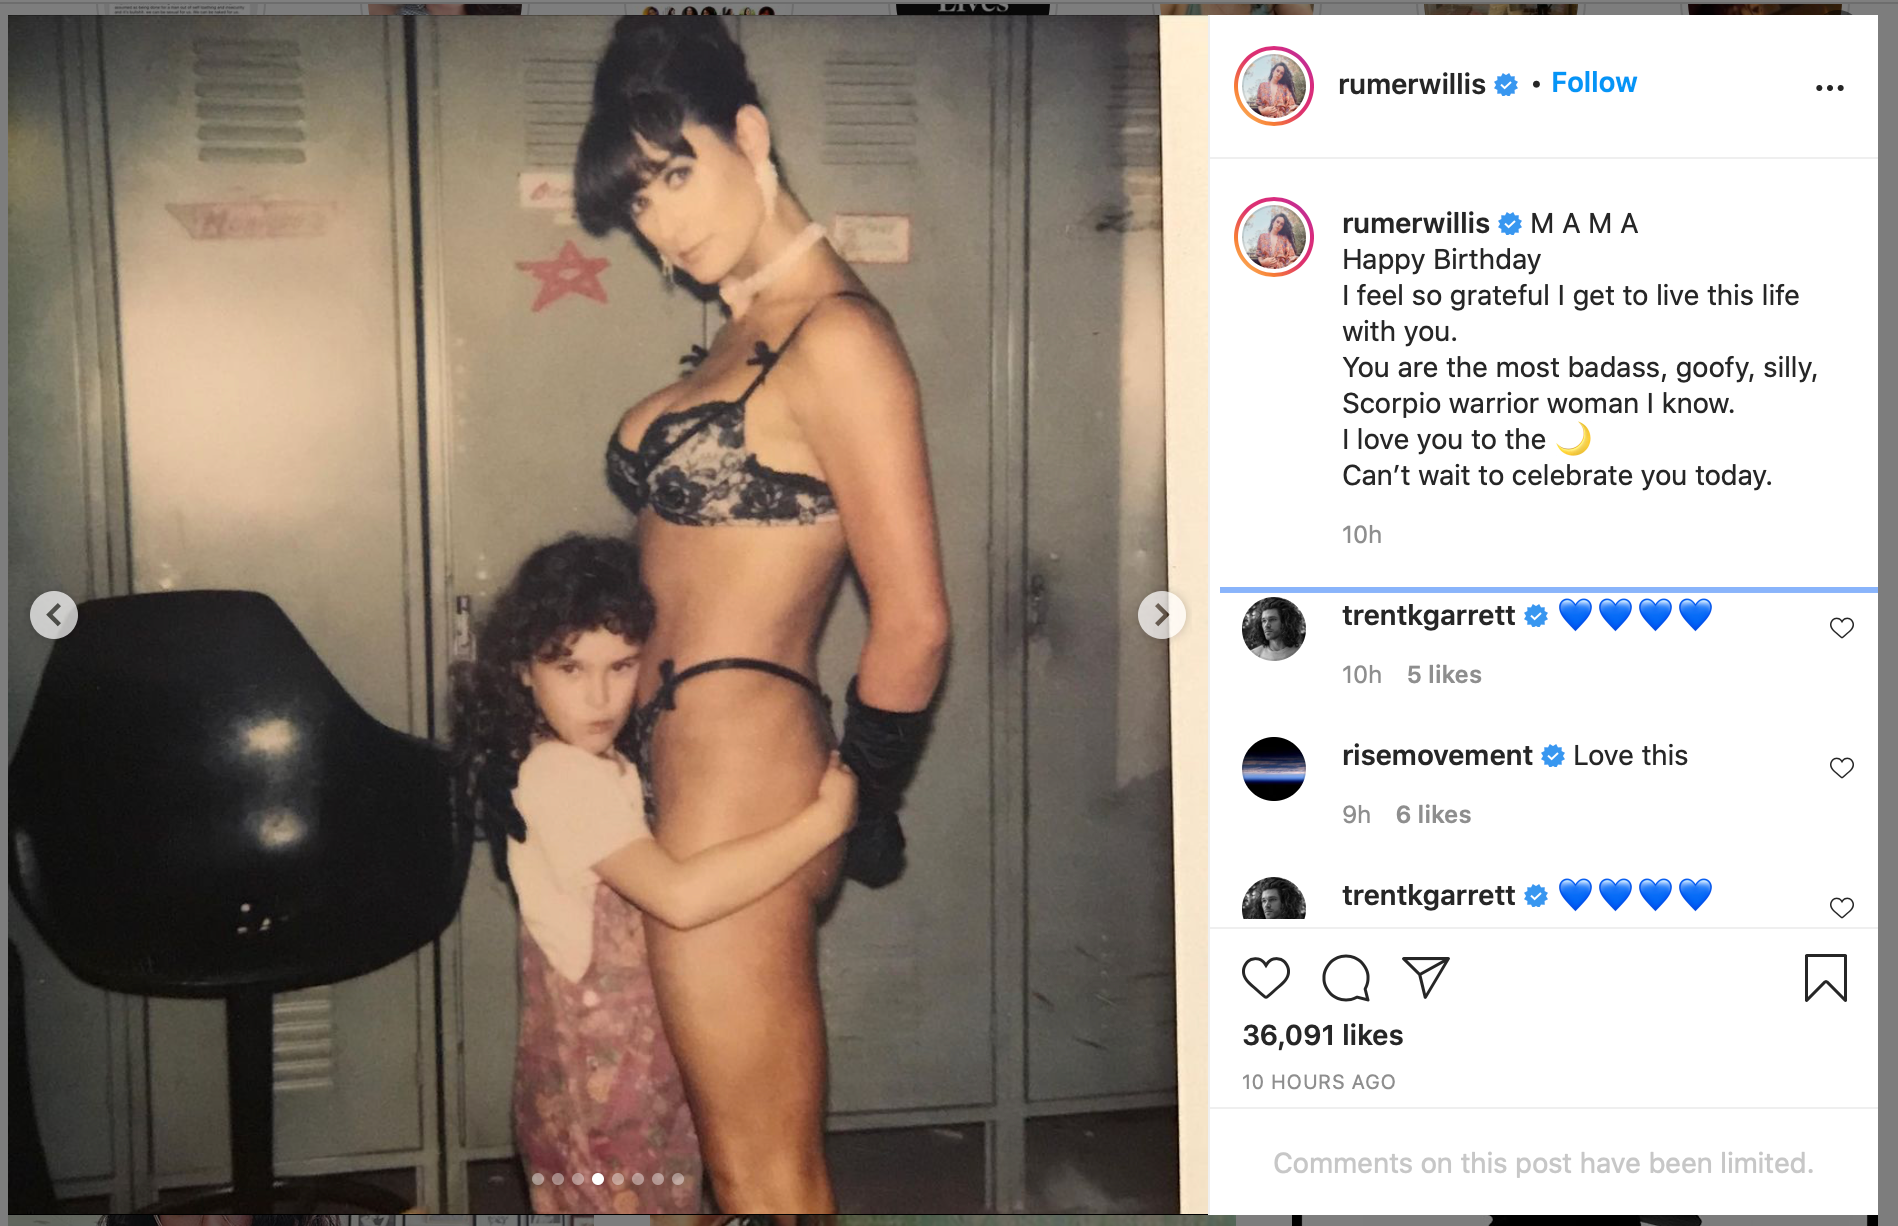 The ‘Striptease’ throwback posted to Rumer Willis’s Instagram